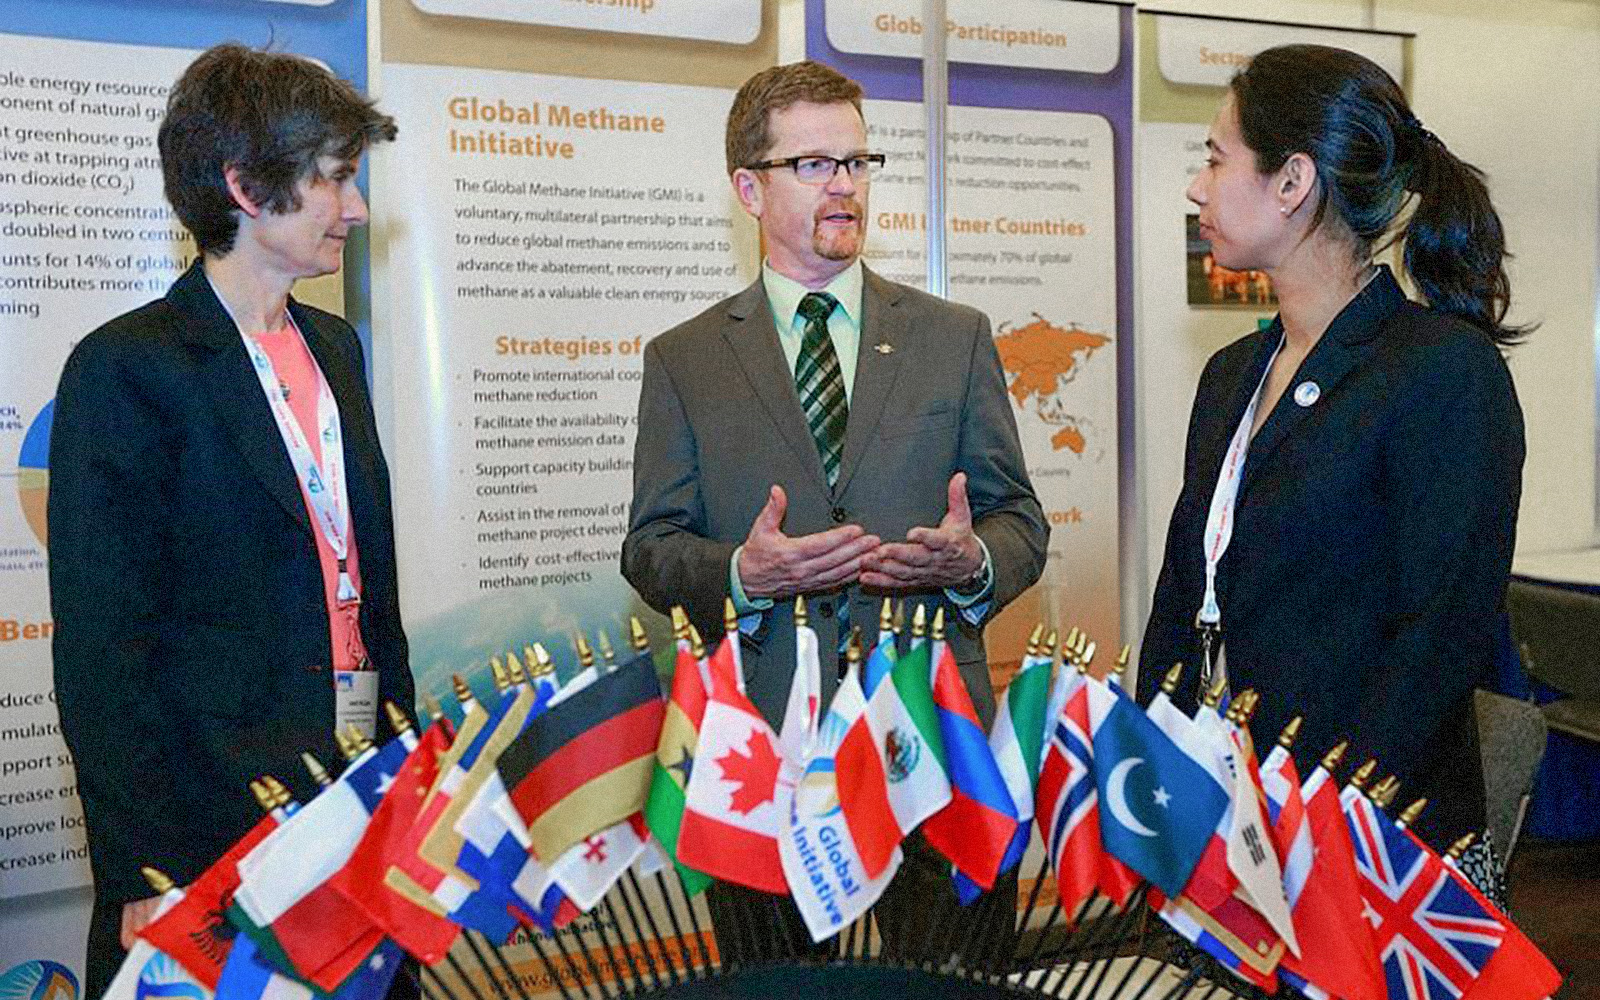 Three professionals stand and talk in front of a poster display about the Global Methane Initiative